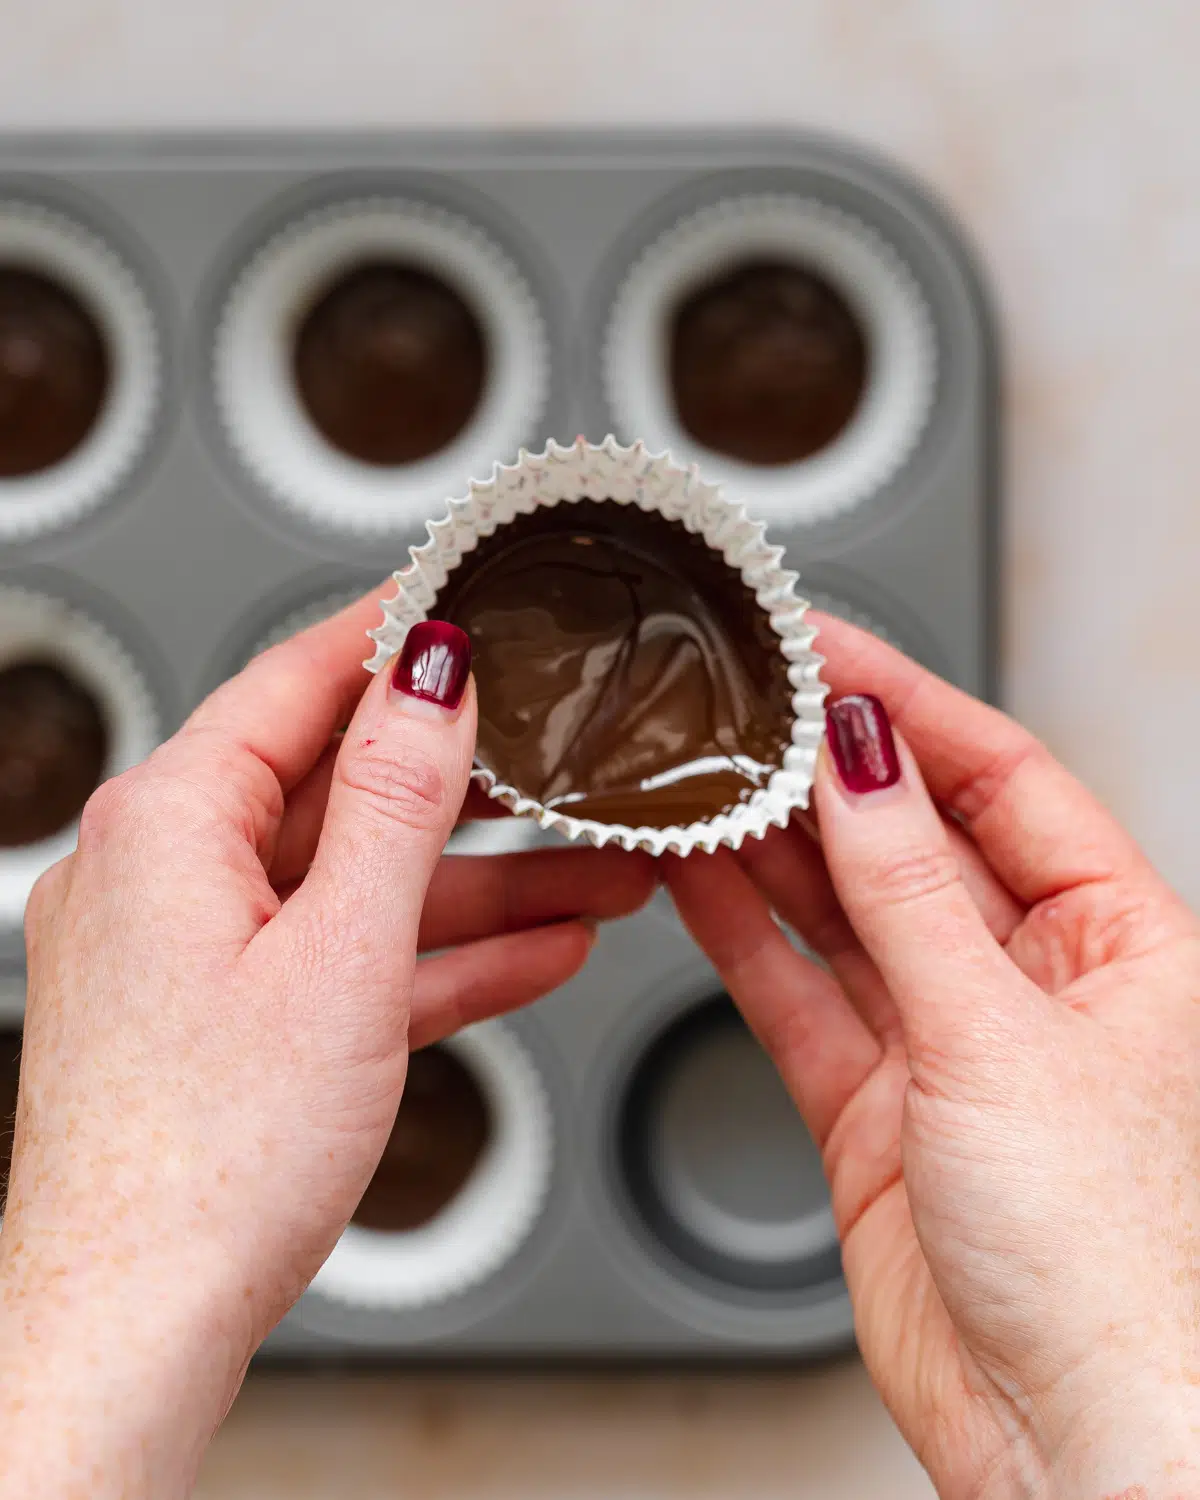 adding chocolate to muffin cases for peanut butter cups.